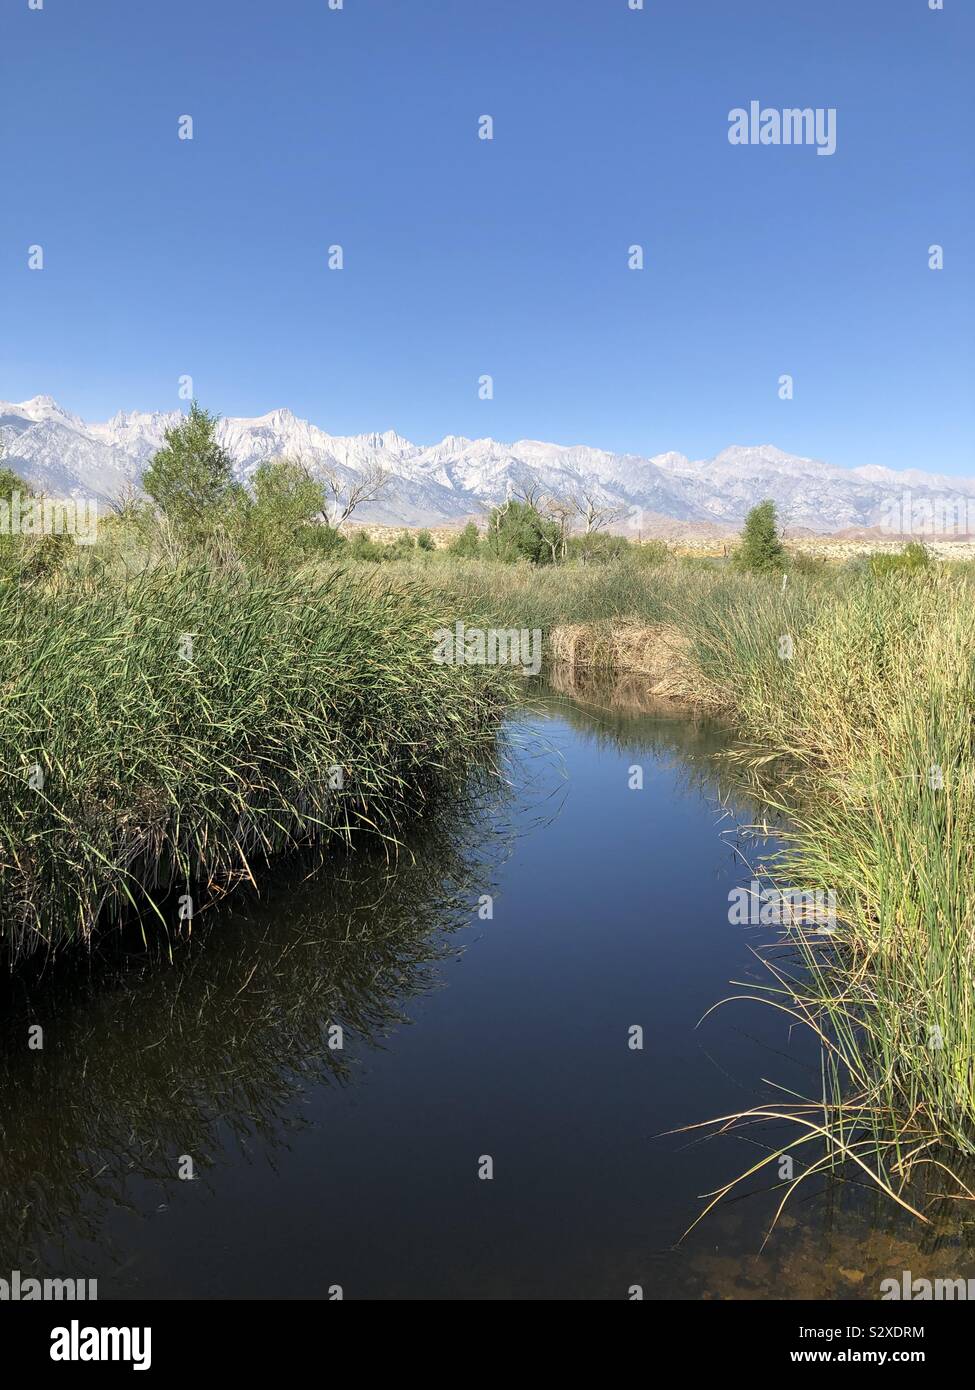 Lower Owens River with Eastern Sierra Nevada mountains in background near Lone Pine, California. Stock Photo